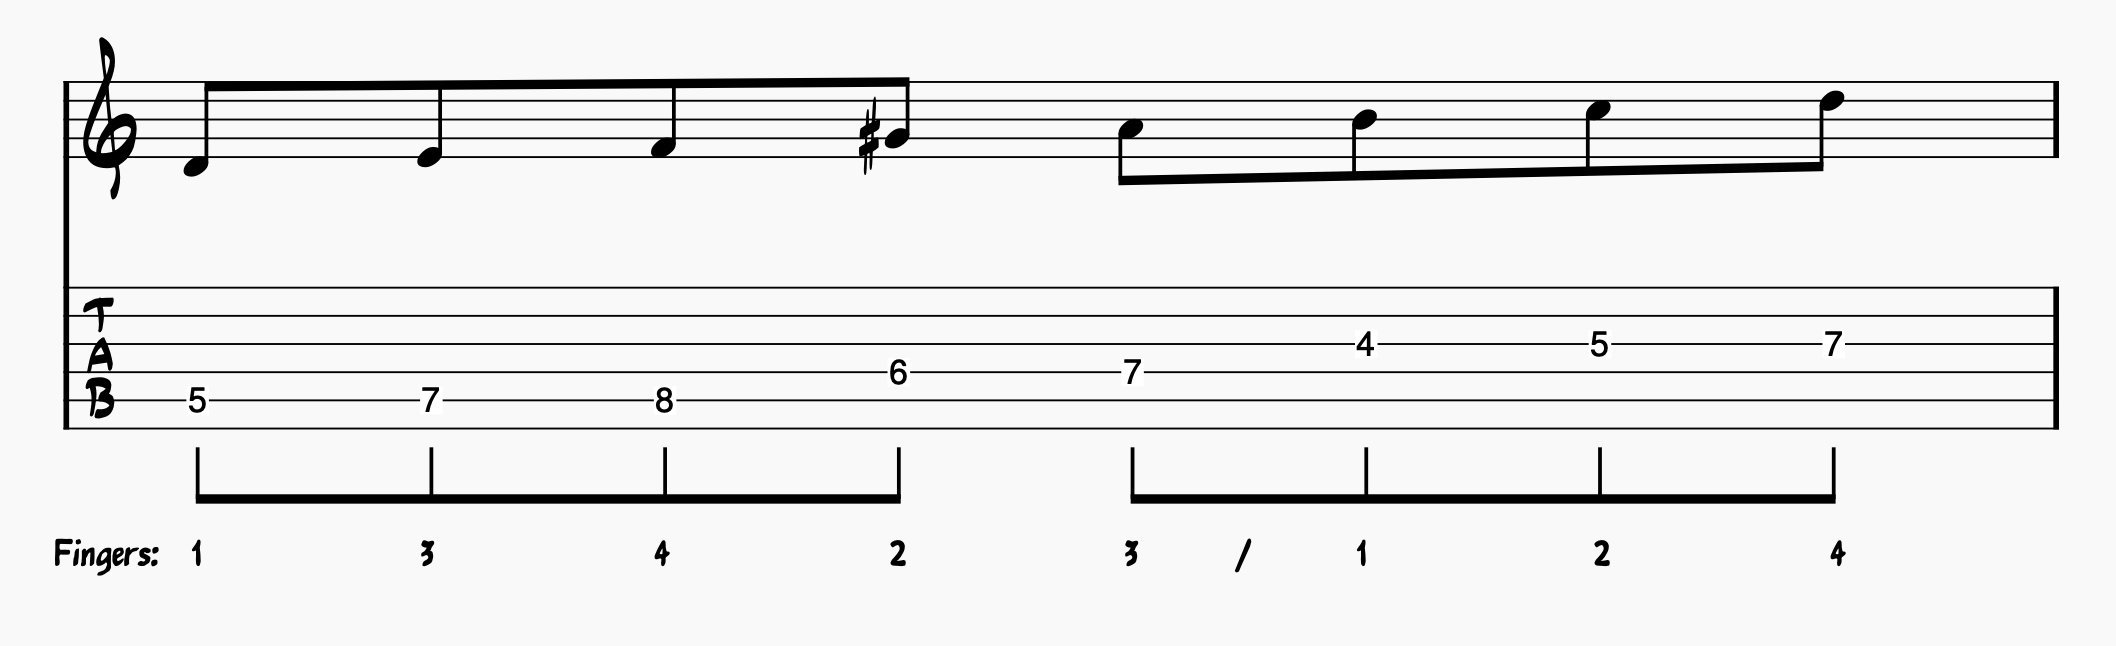 D Altered Dorian; the fourth mode of A harmonic minor